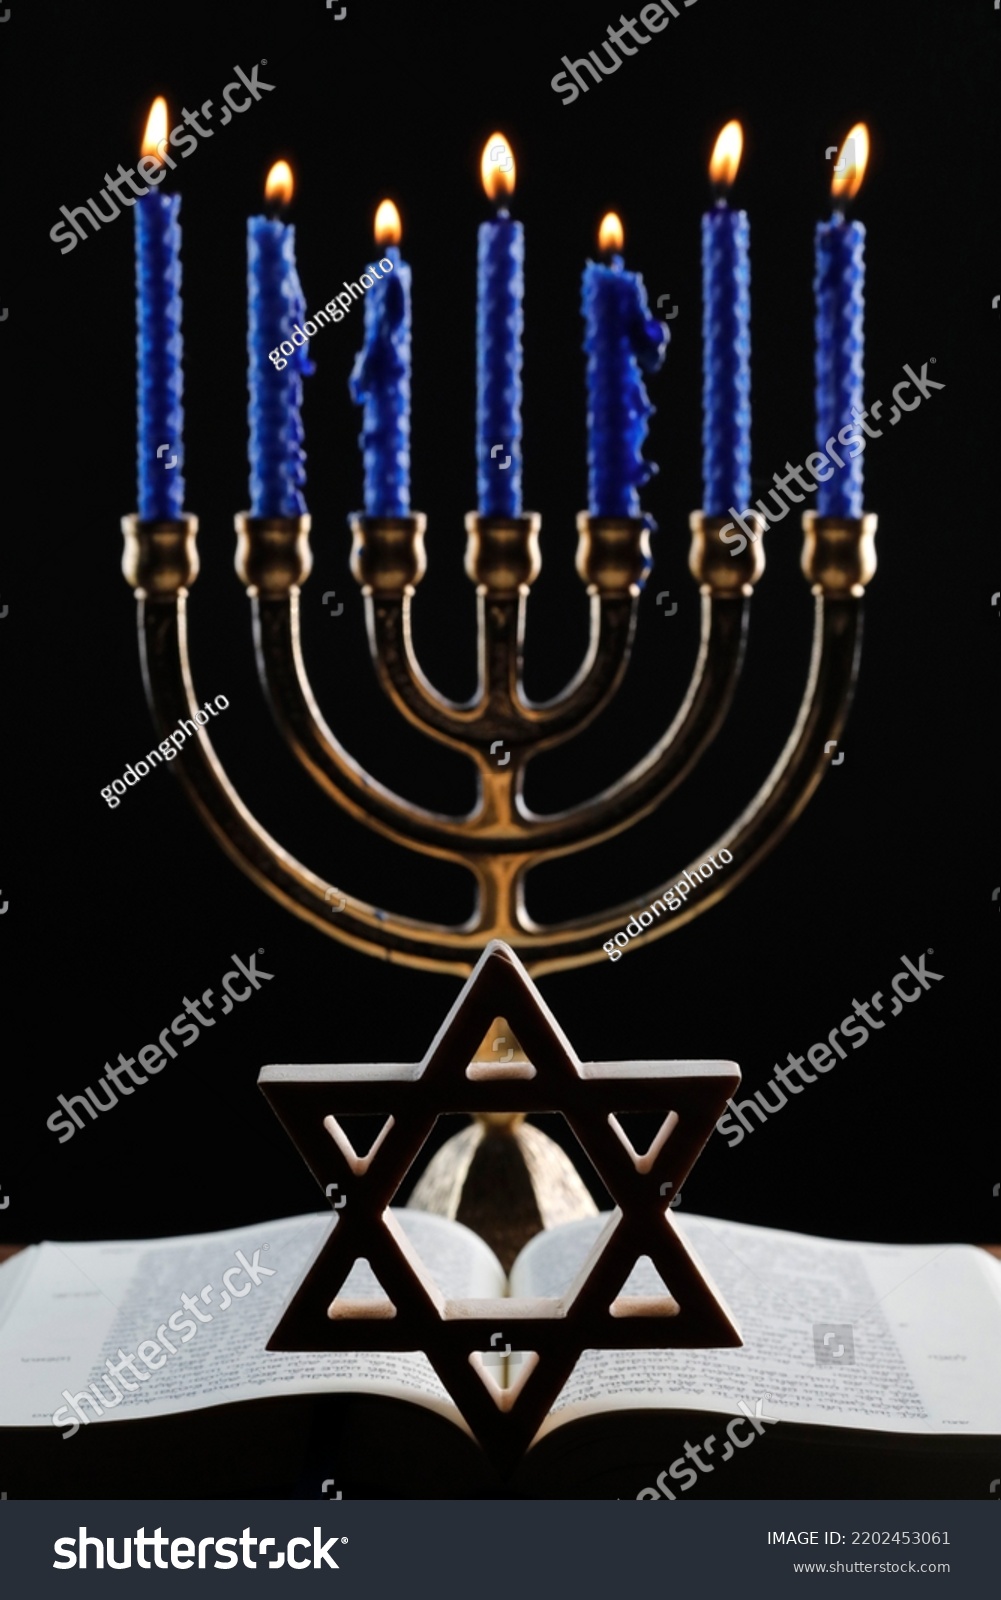 Open Torah, star of David  and the menorah or seven-lamp Hebrew lampstand, symbol of Judaism since ancient times.  #2202453061